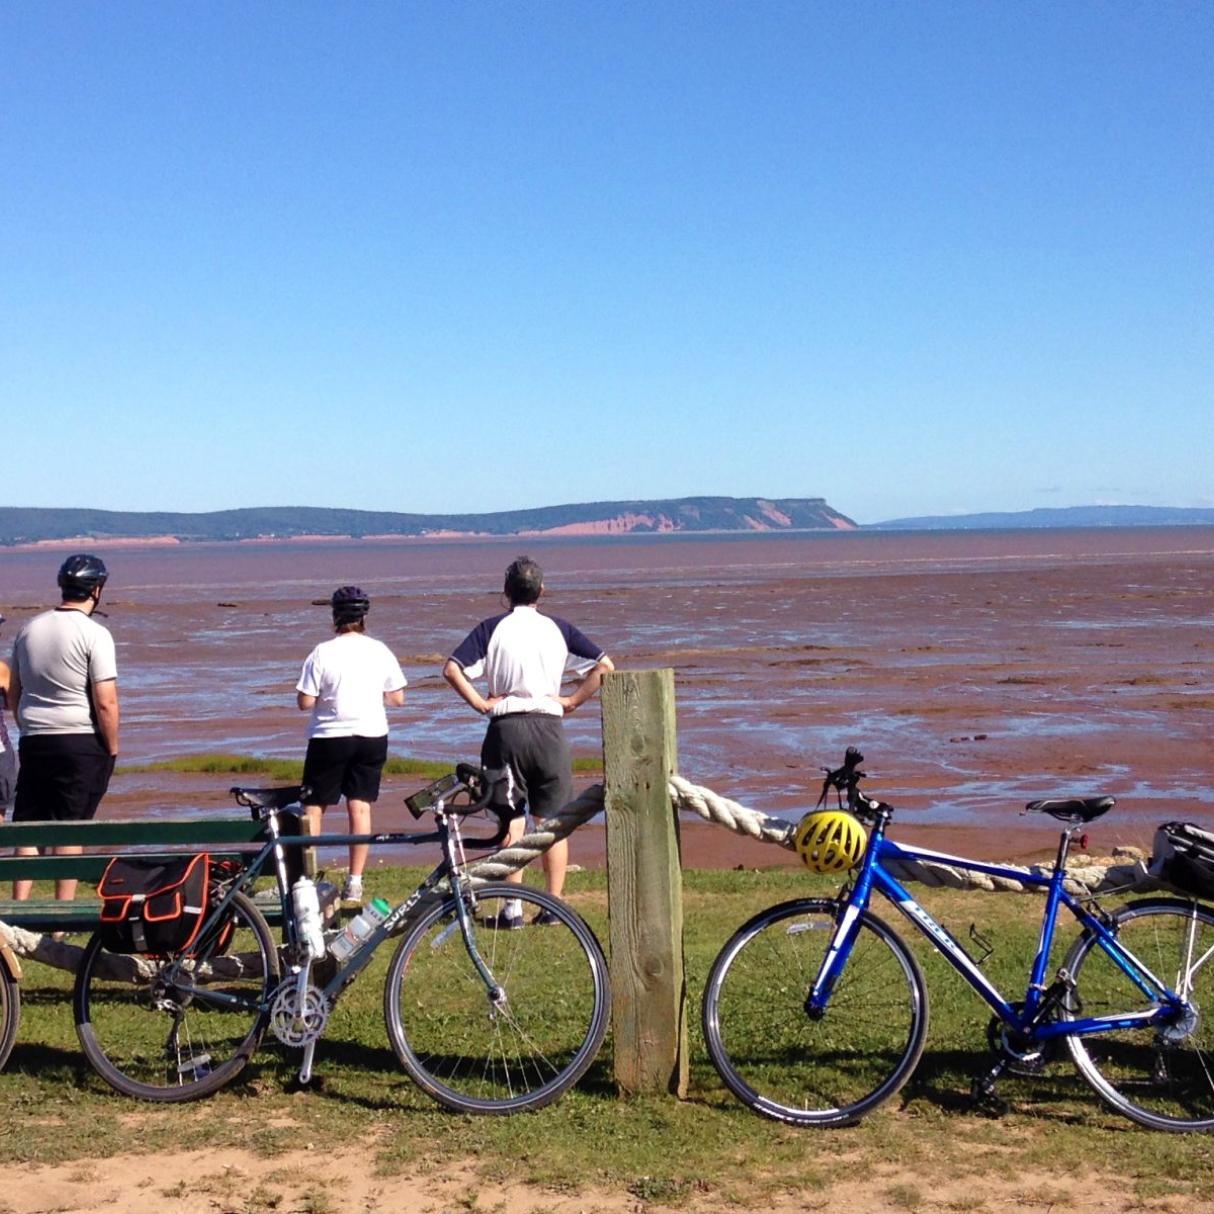 4 cyclists stop to view low tide